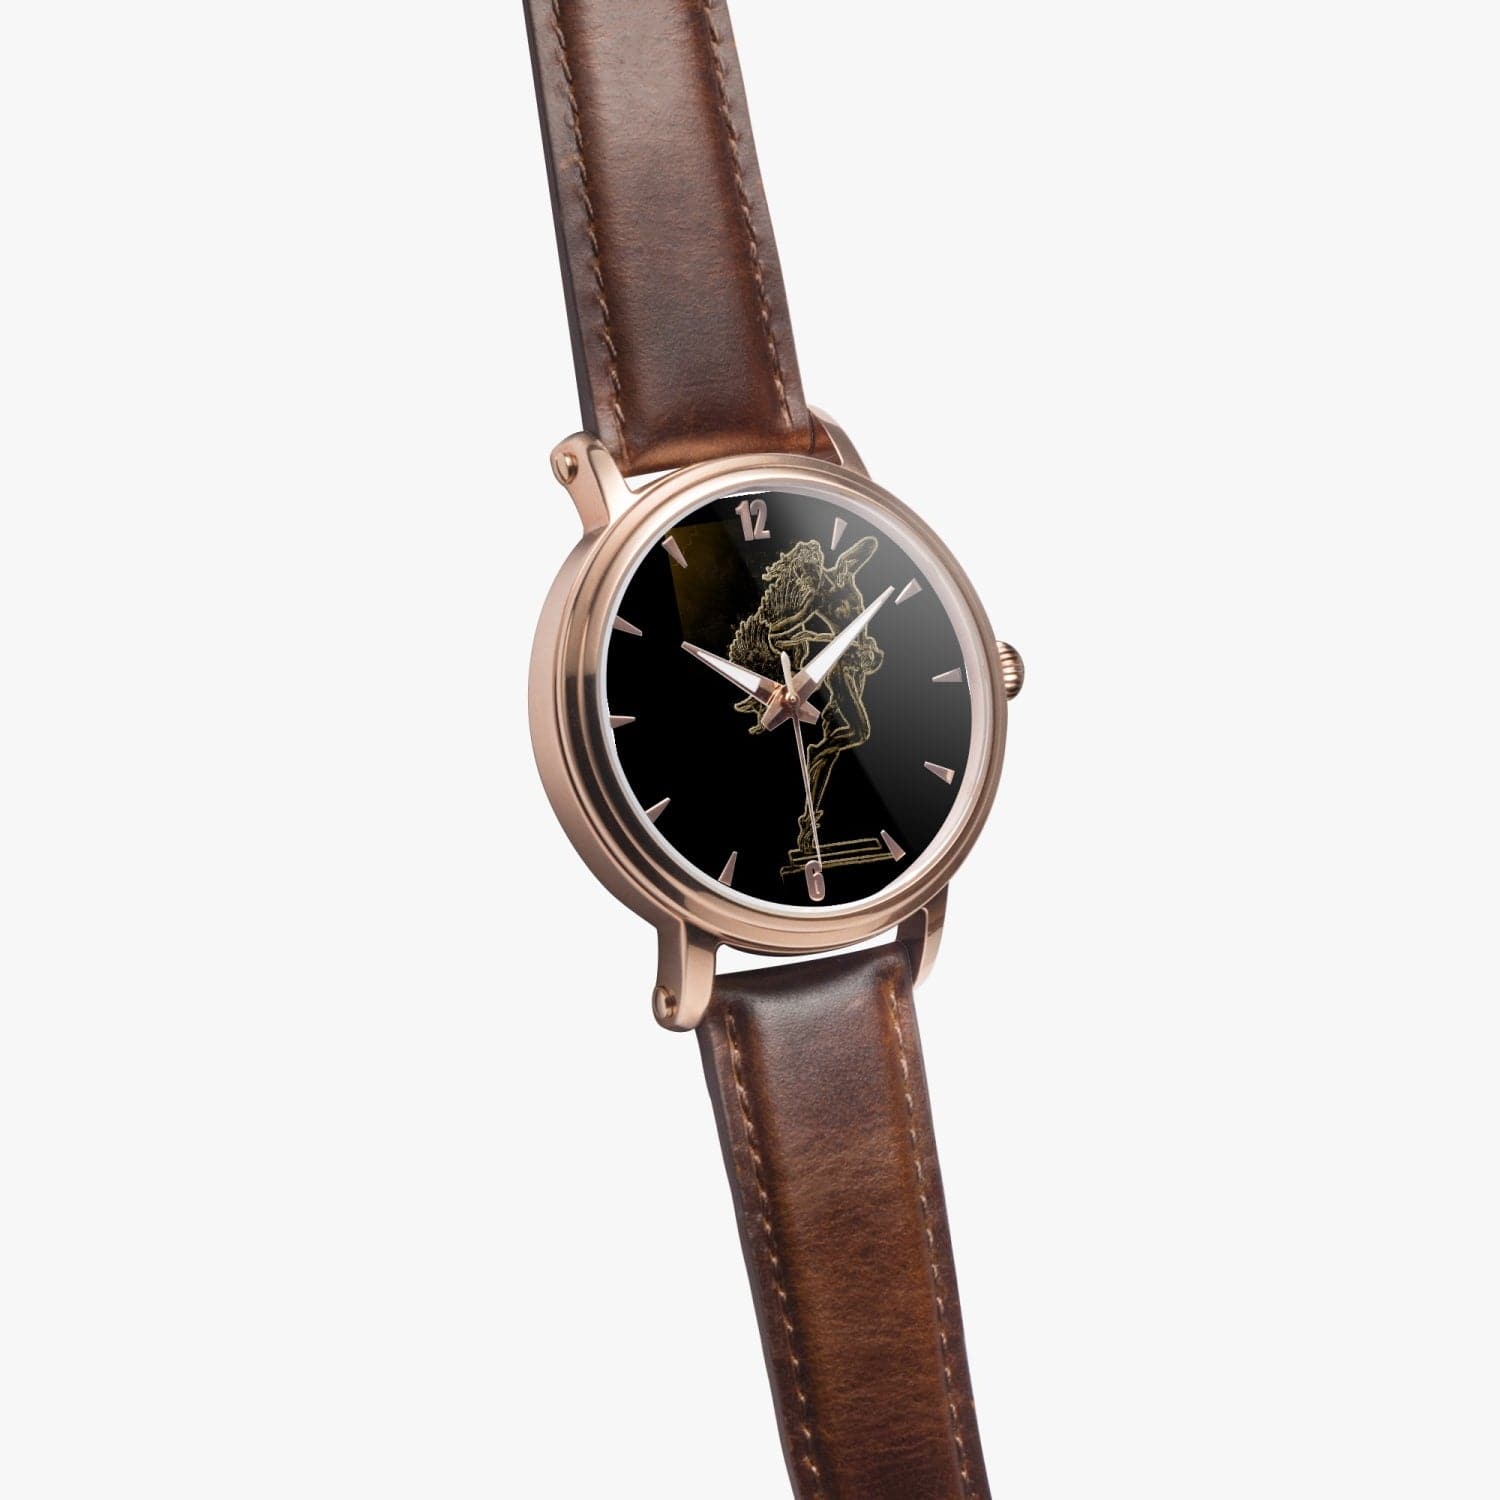 'Lena and the Swan'. artprint Unisex Automatic Watch (Rose Gold)